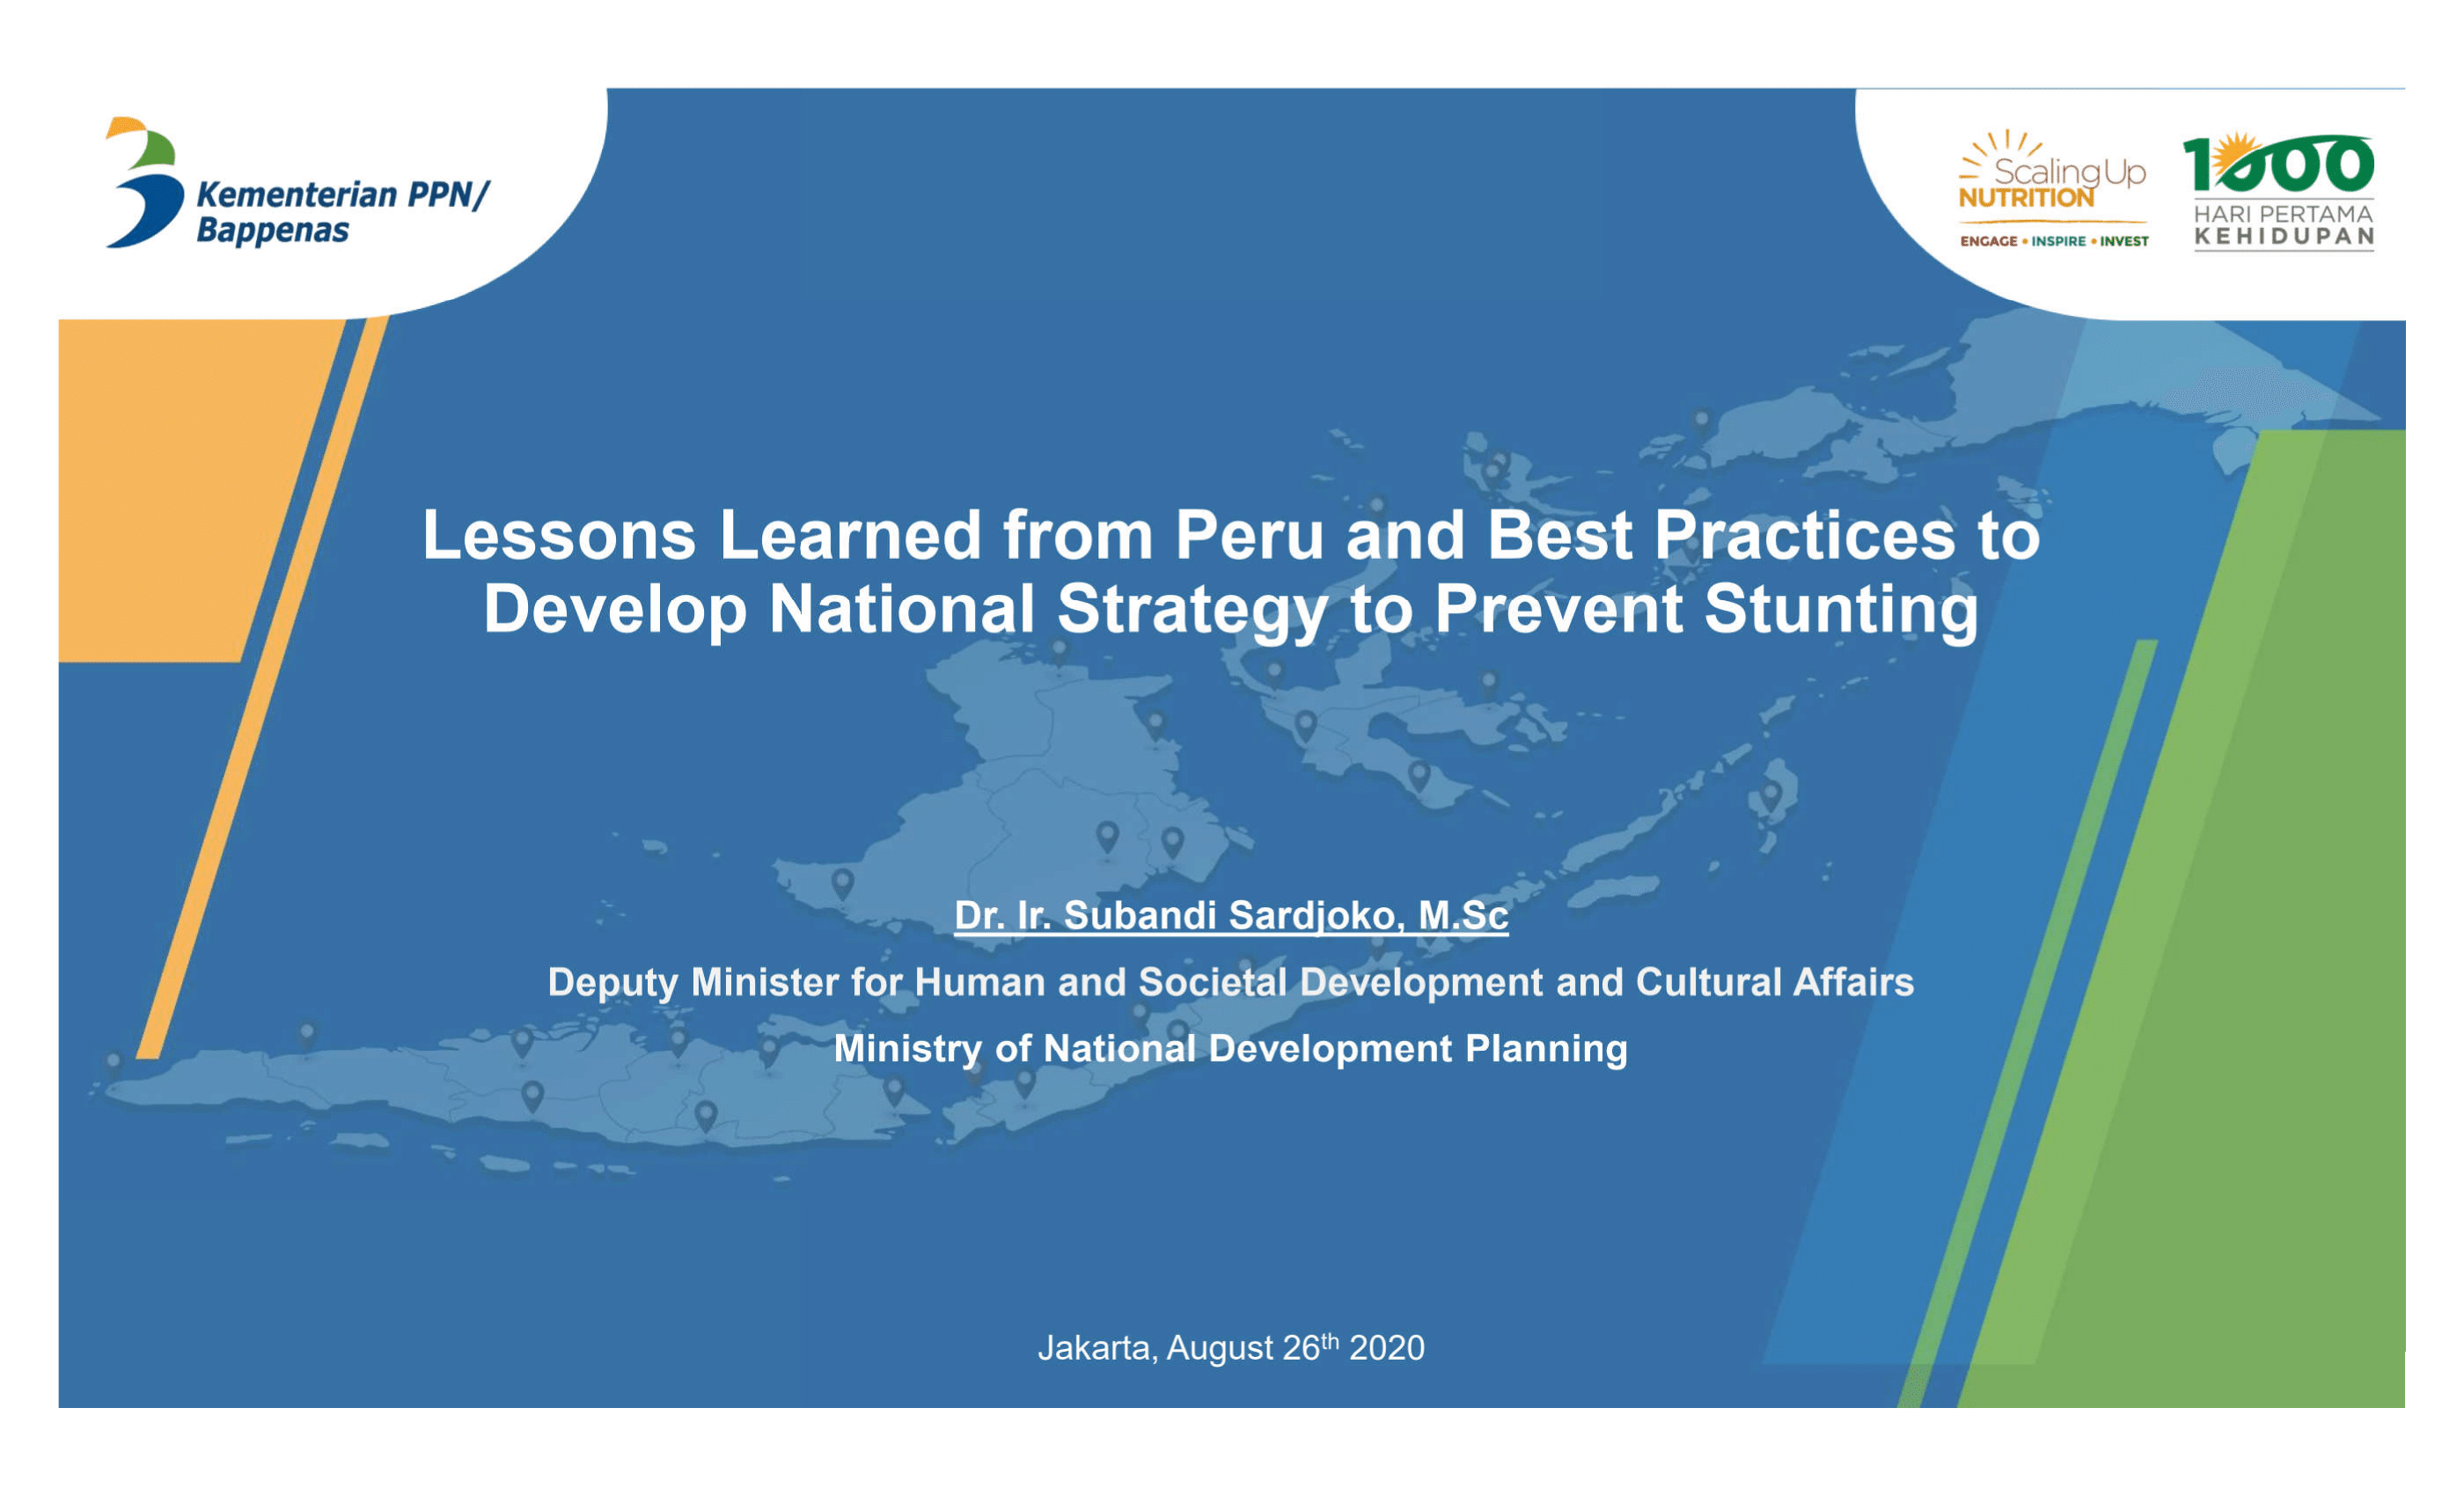 Lessons Learned from Peru and Best Practices